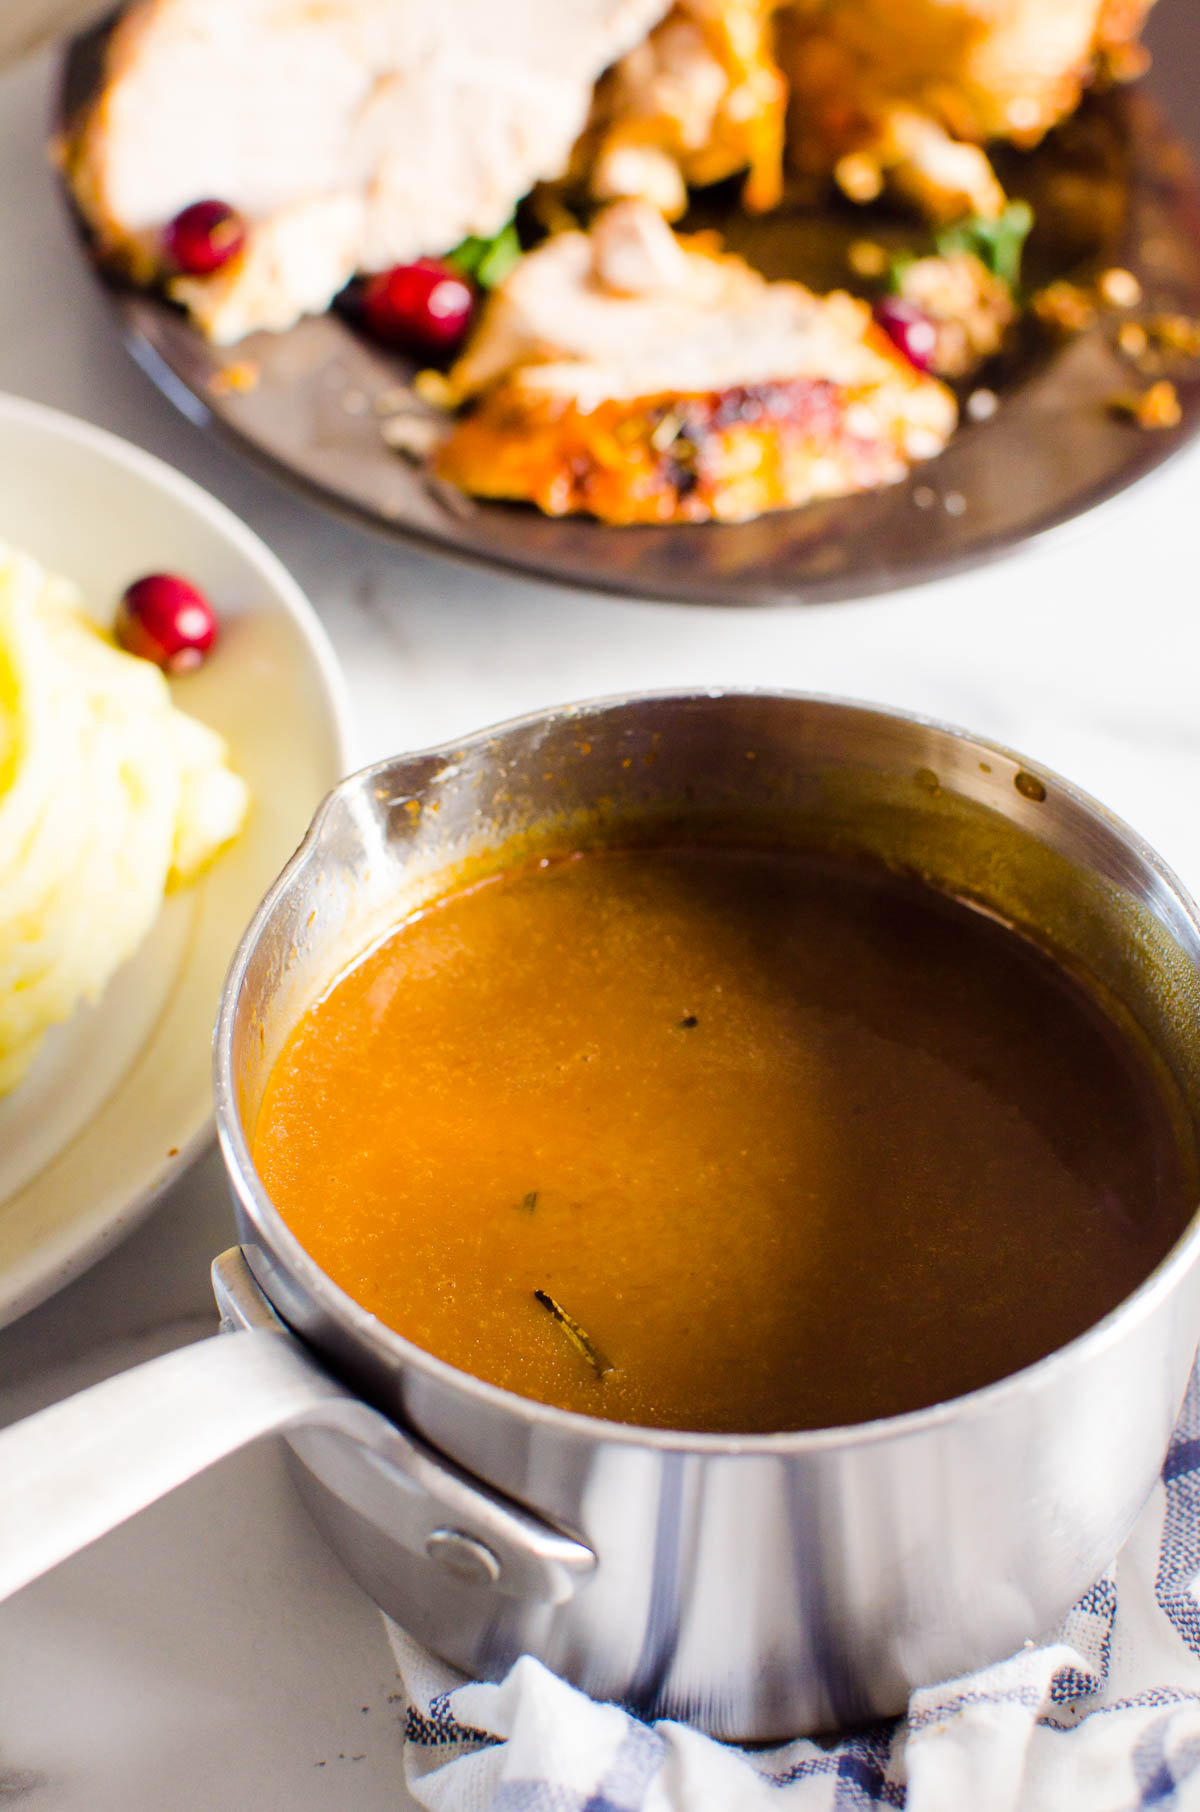 Turkey gravy in small pot, mashed potatoes and turkey in serving dishes nearby.